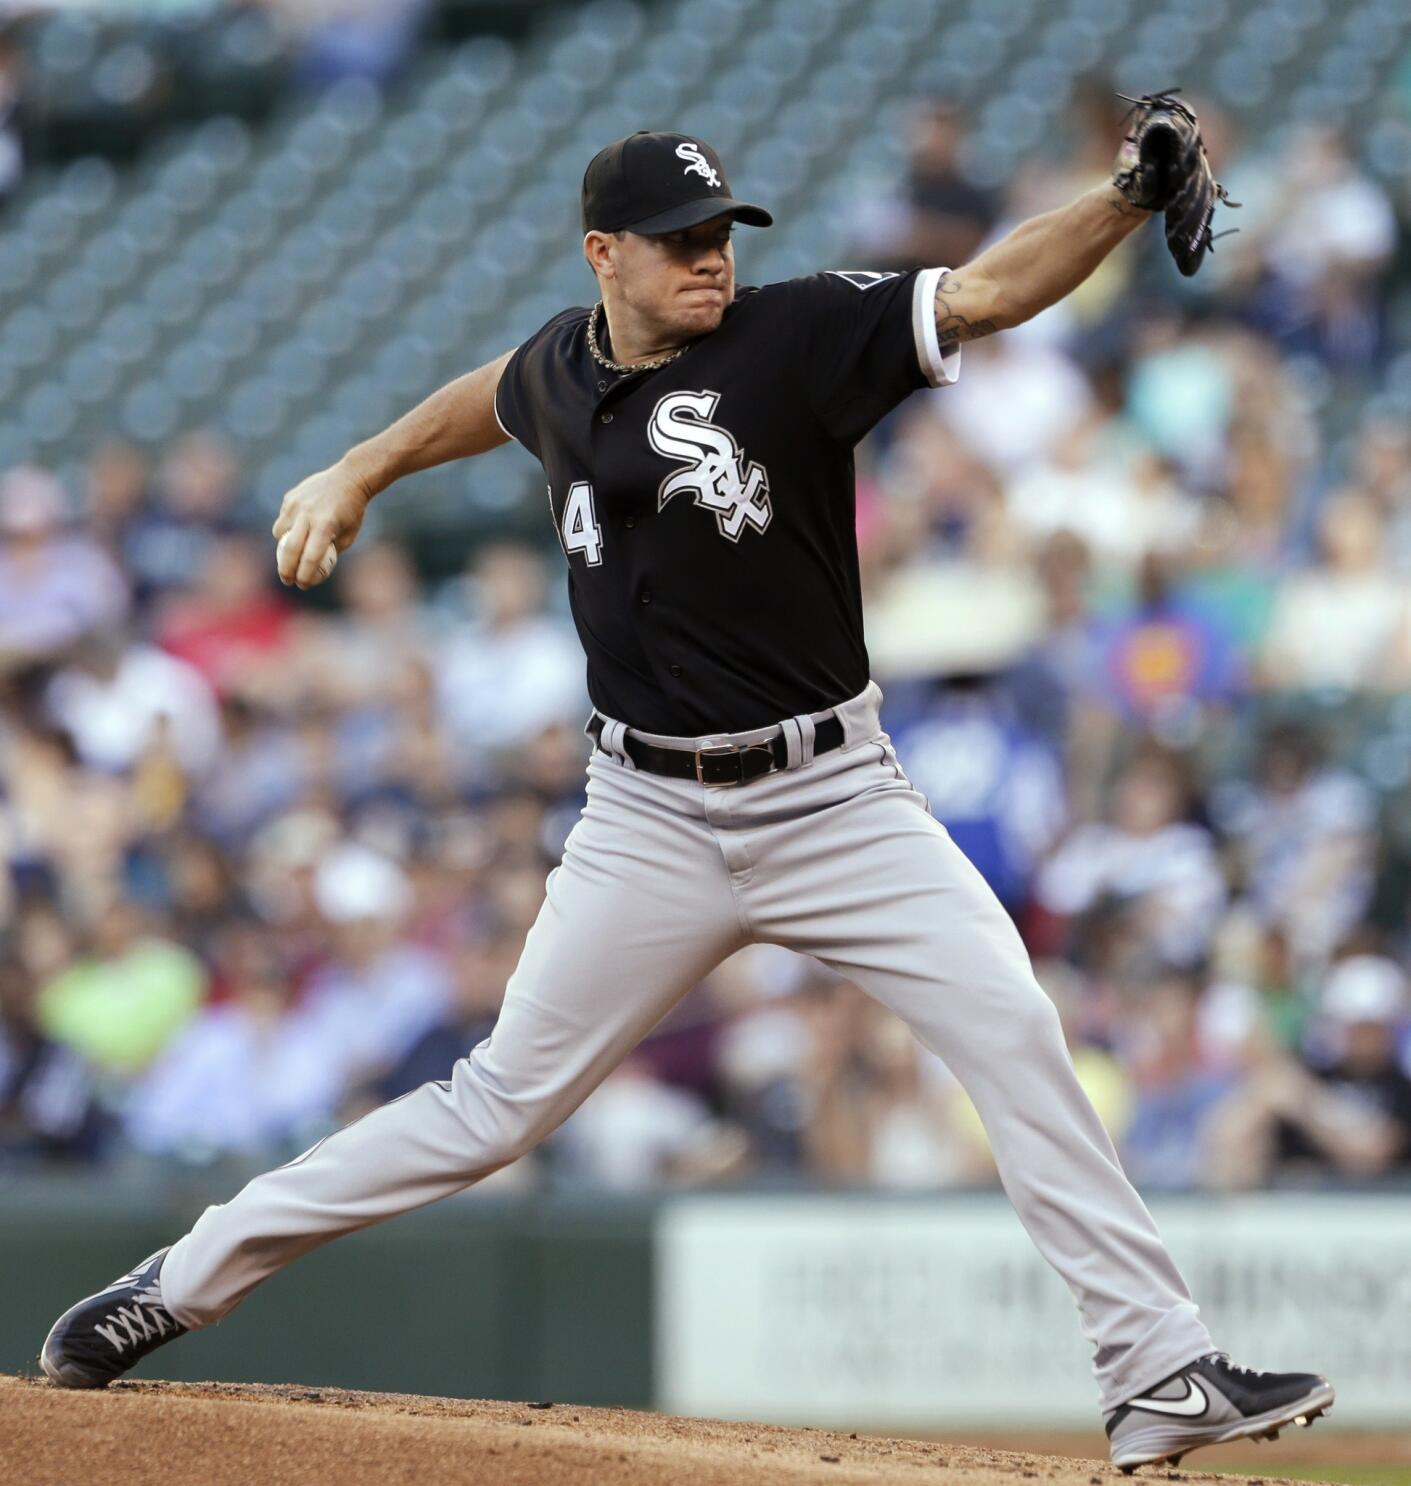 The Boston Red Sox acquire Jake Peavy from the Chicago White Sox